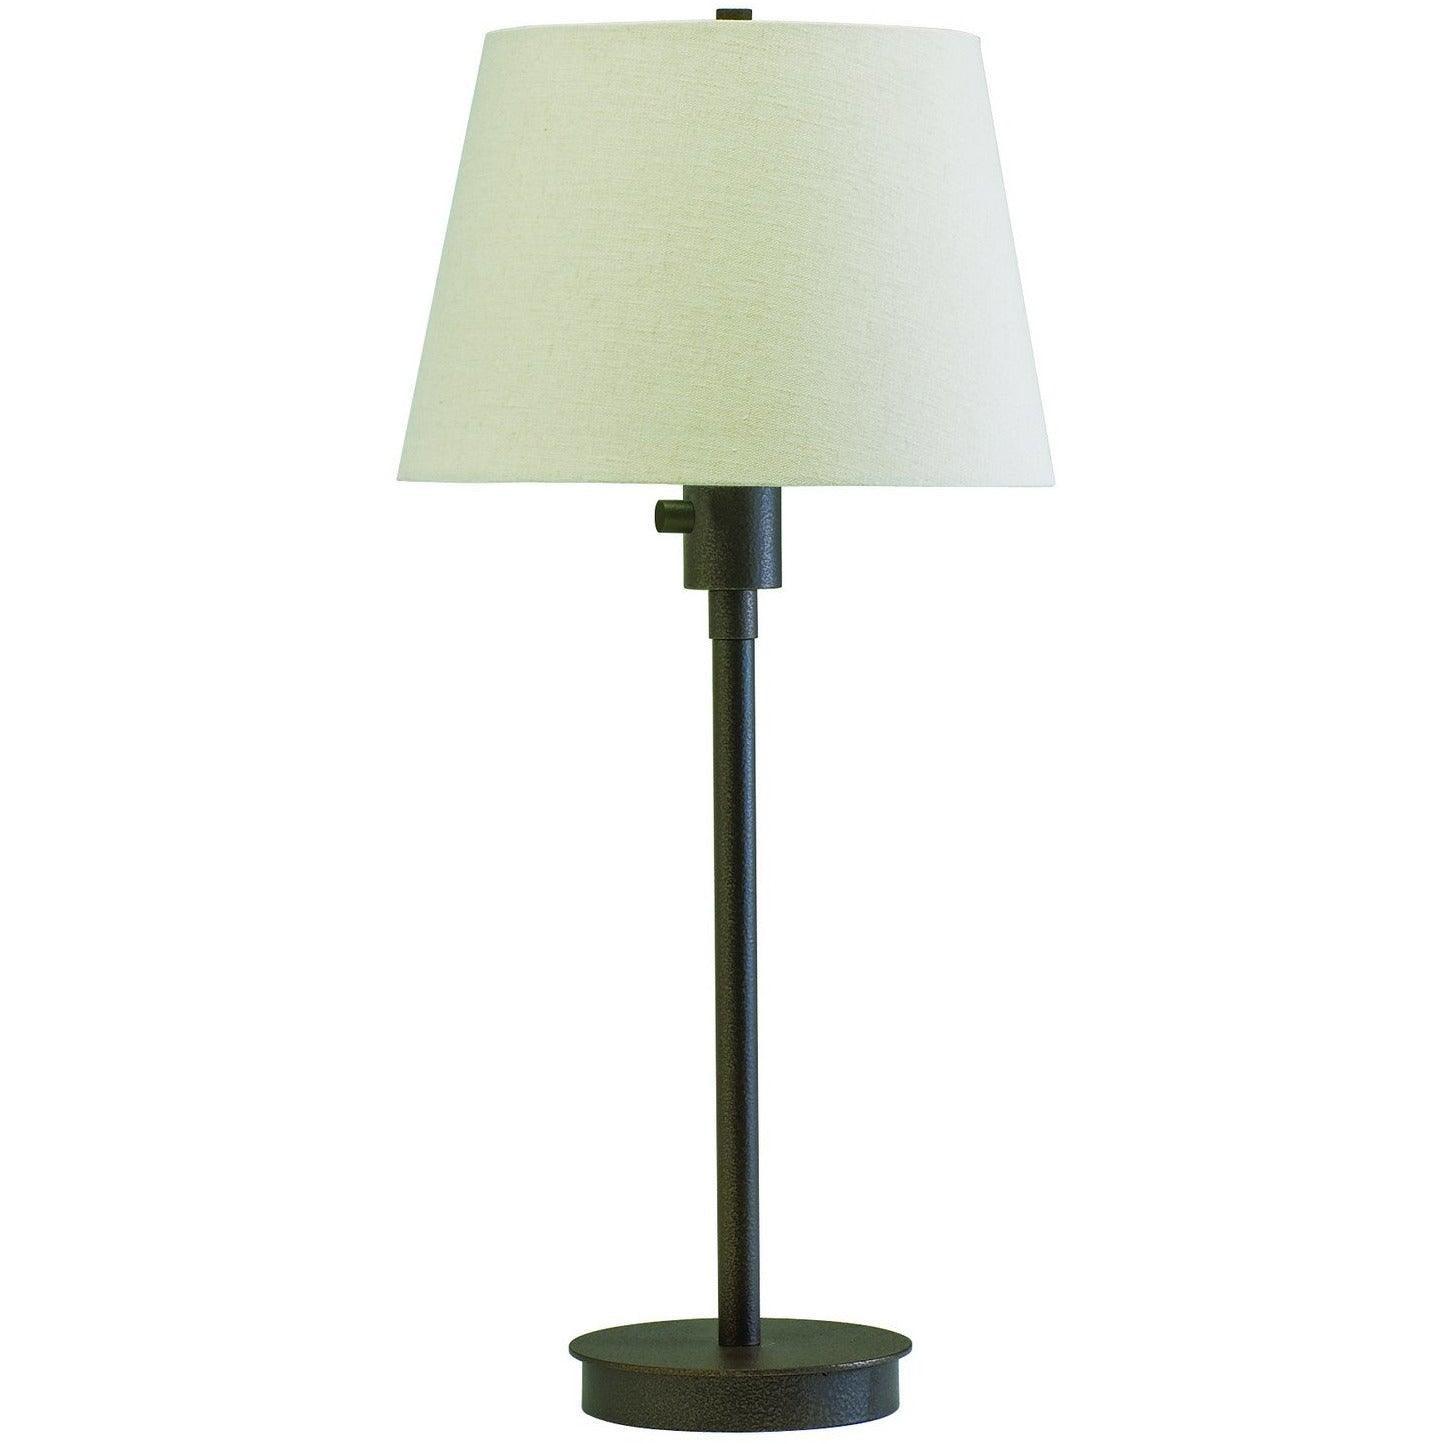 House of Troy - Generation One Light Table Lamp - G250-GT | Montreal Lighting & Hardware